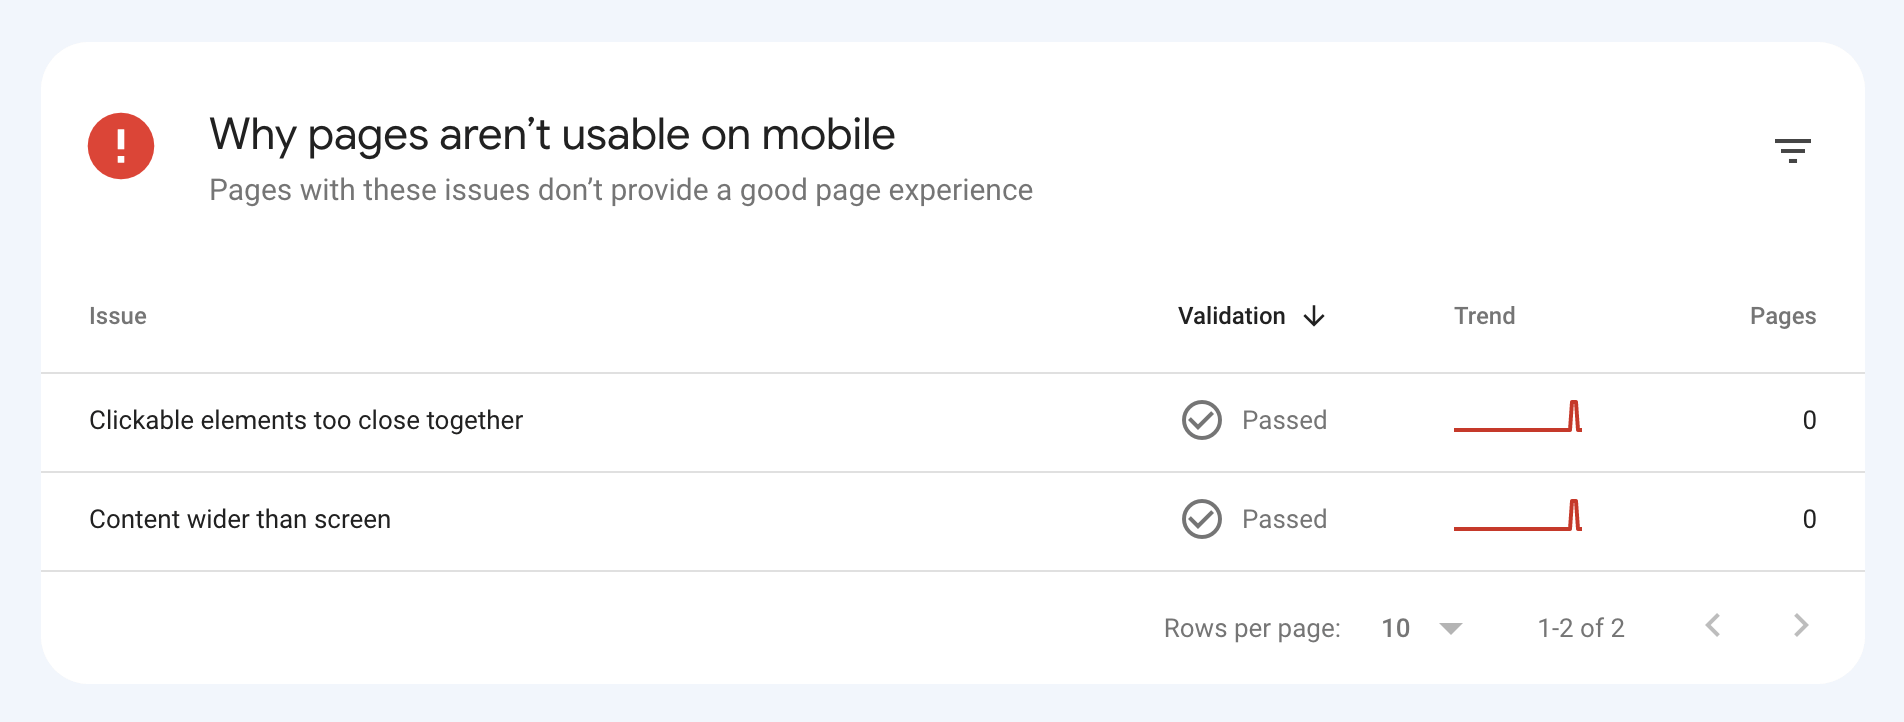 Google Search Console's Mobile Usability report